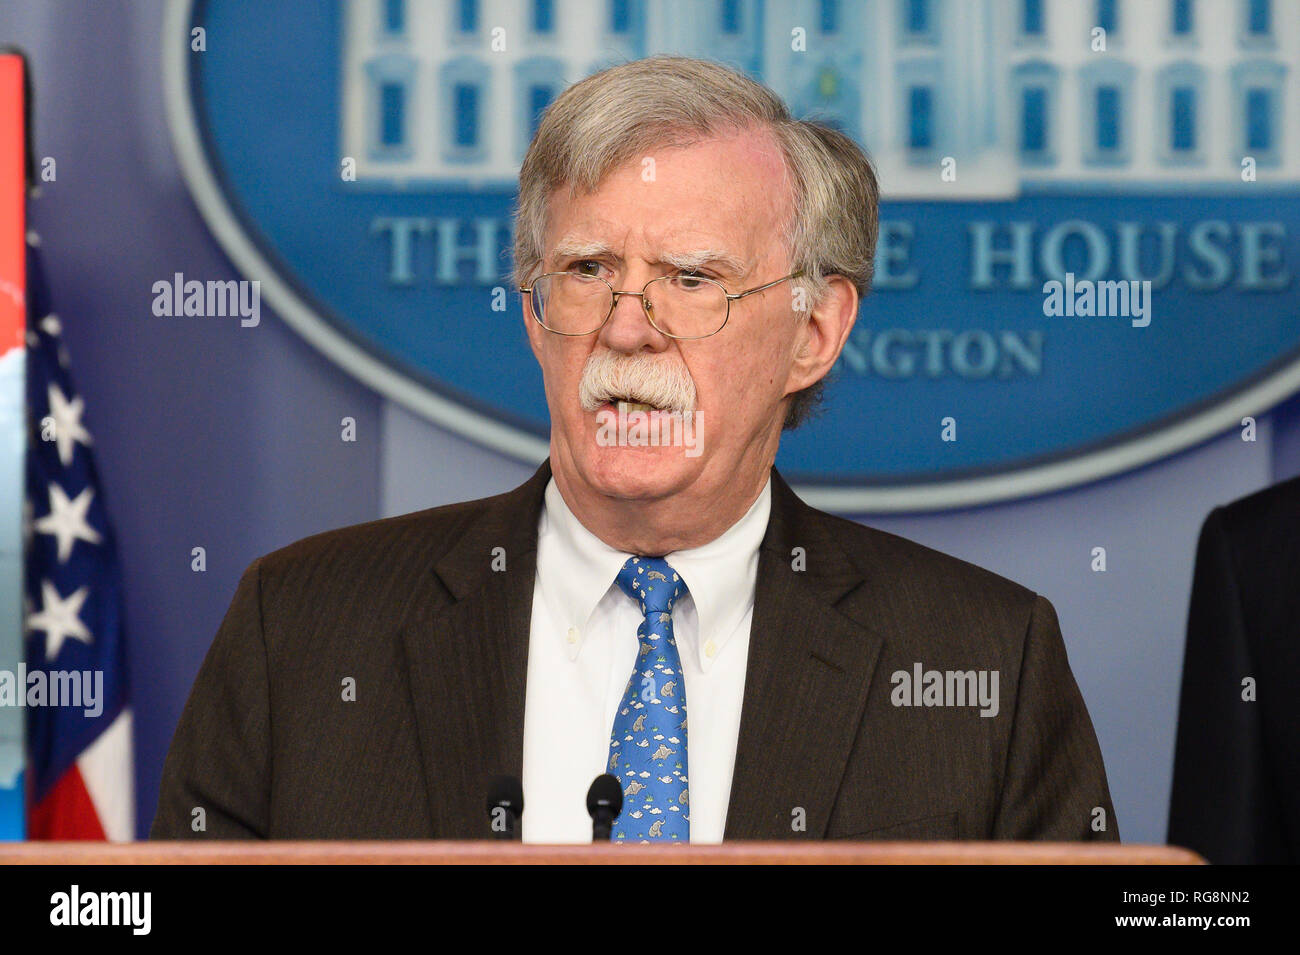 Washington, DC, USA. 28th Jan, 2019. John Bolton, National Security Advisor of the United States, in the White House Press Briefing room at the White House in Washington, DC. Credit: Michael Brochstein/SOPA Images/ZUMA Wire/Alamy Live News Stock Photo